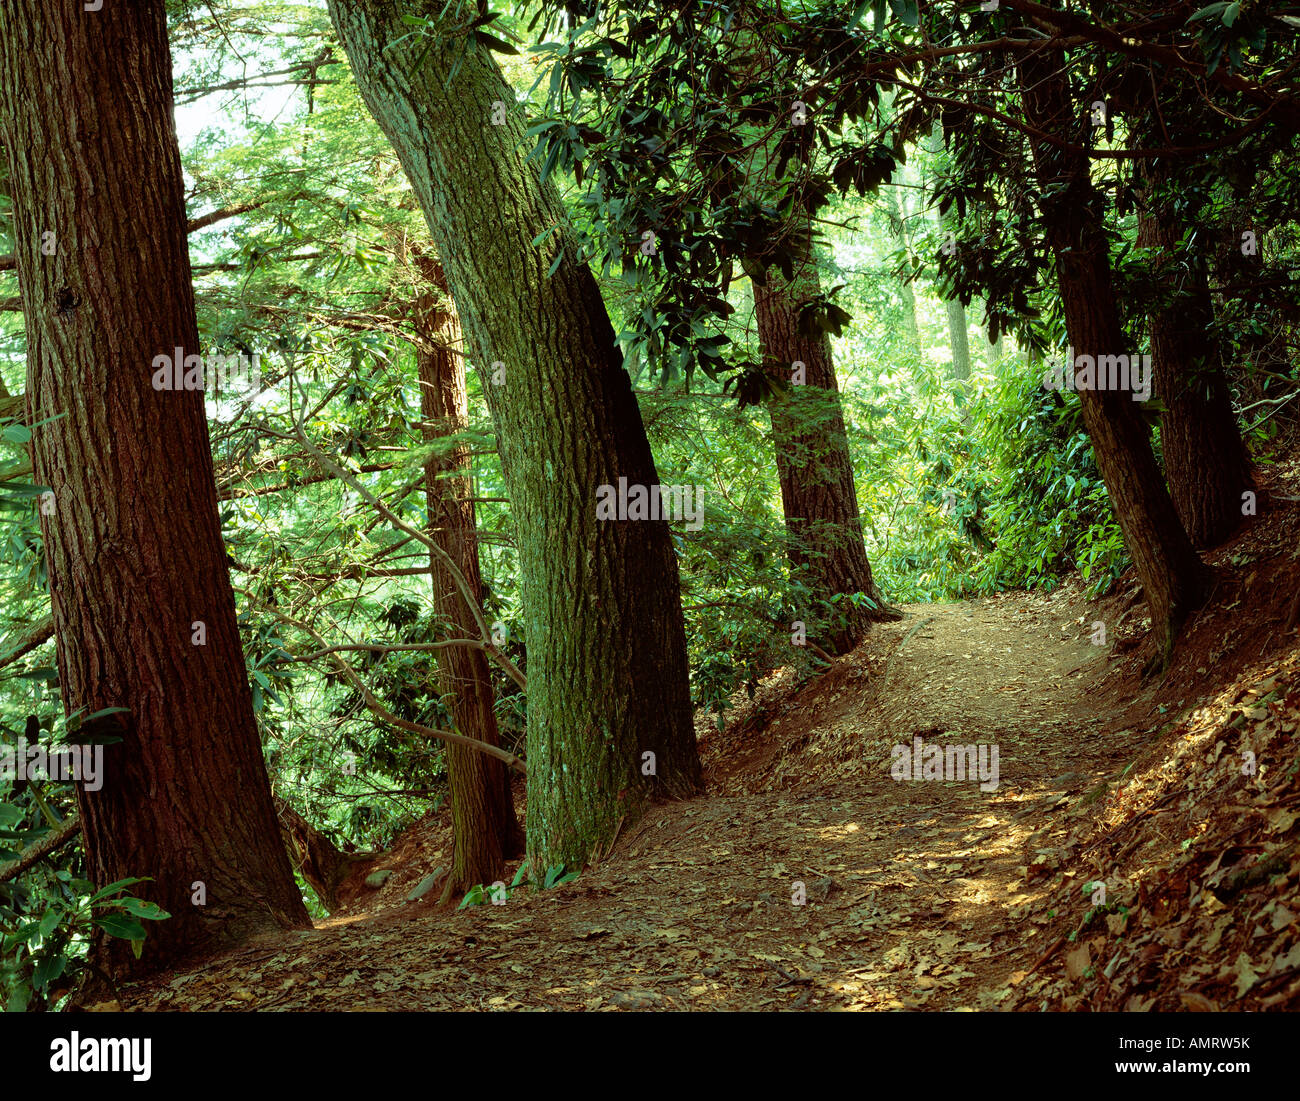 Forest trail through Eastern Hemlock trees Pinaceae Tsuga canadensis in the Ferncliff Penninsula National Natural Landmark Stock Photo